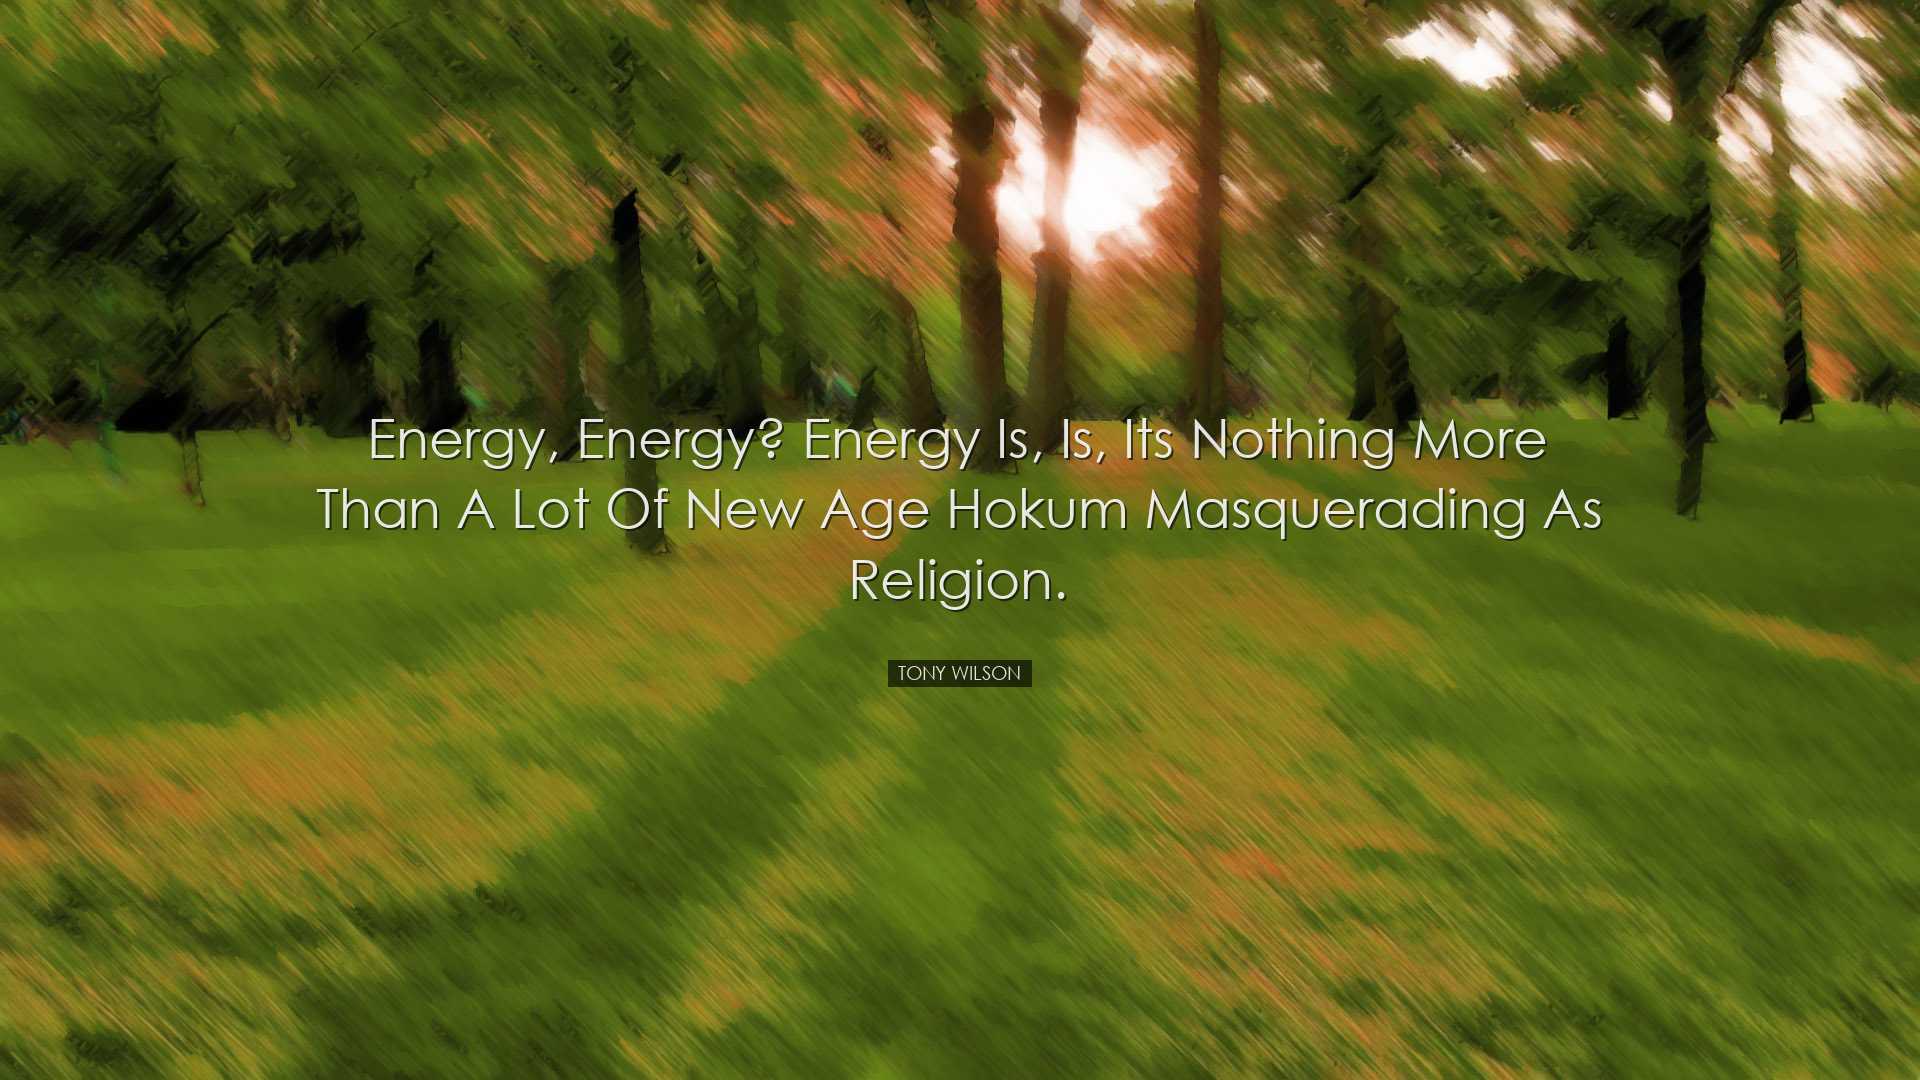 Energy, energy? Energy is, is, its nothing more than a lot of new